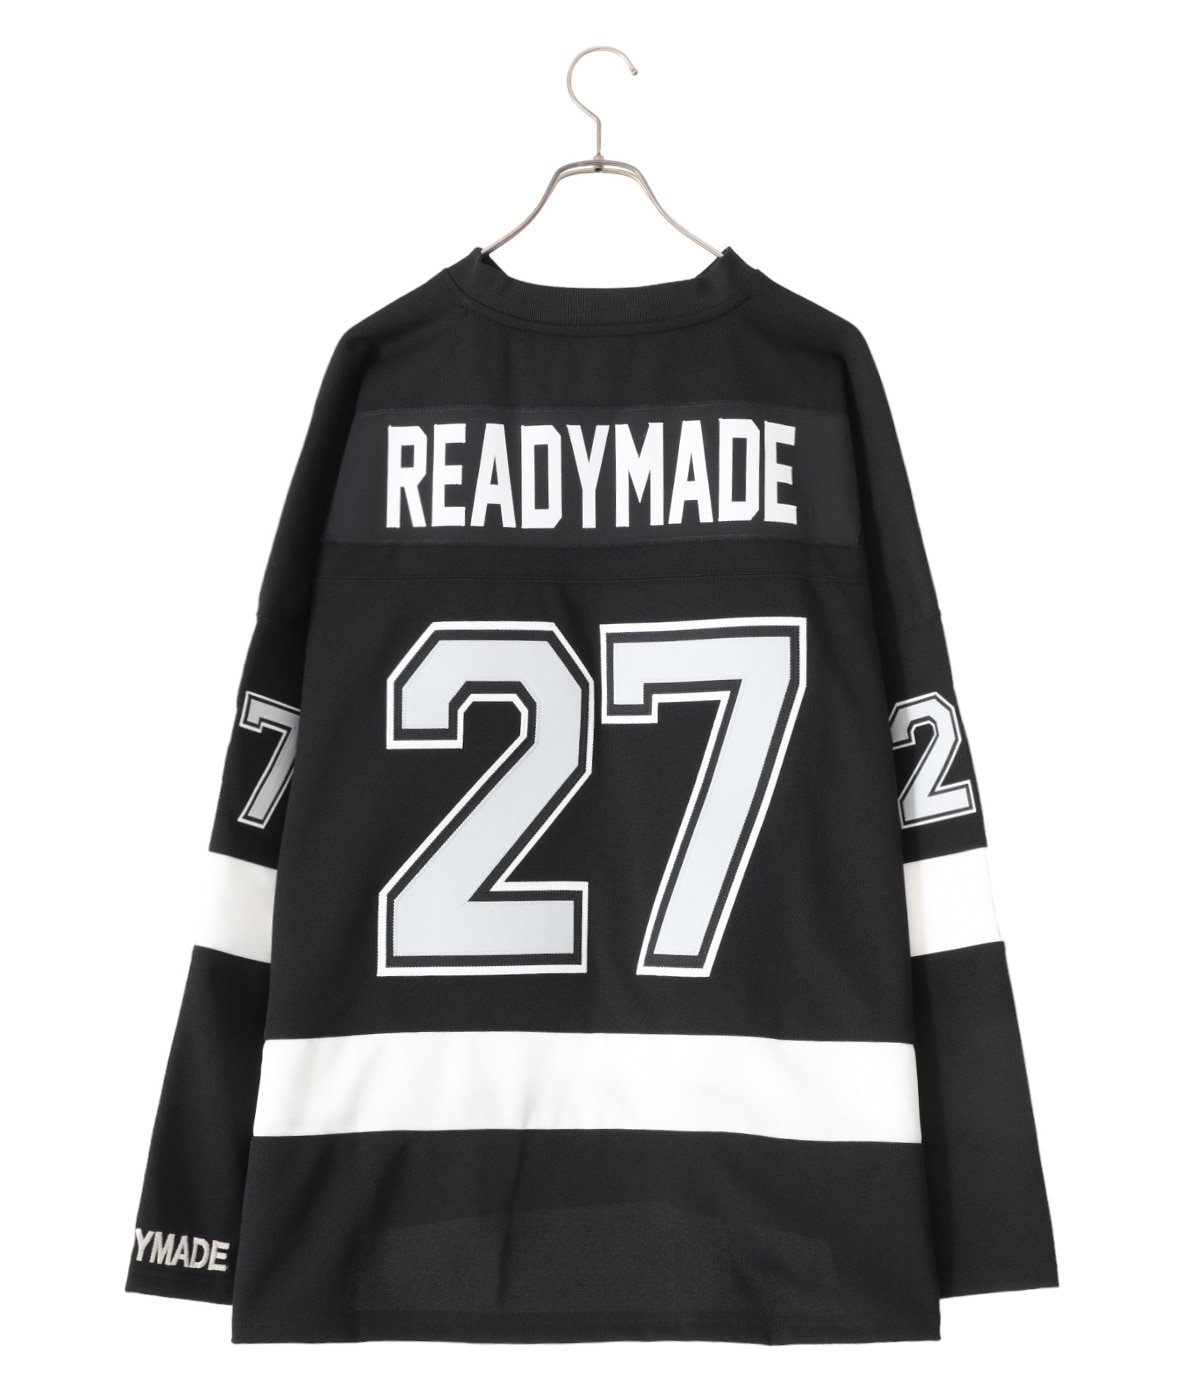 READYMADE GAME SHIRT size 2